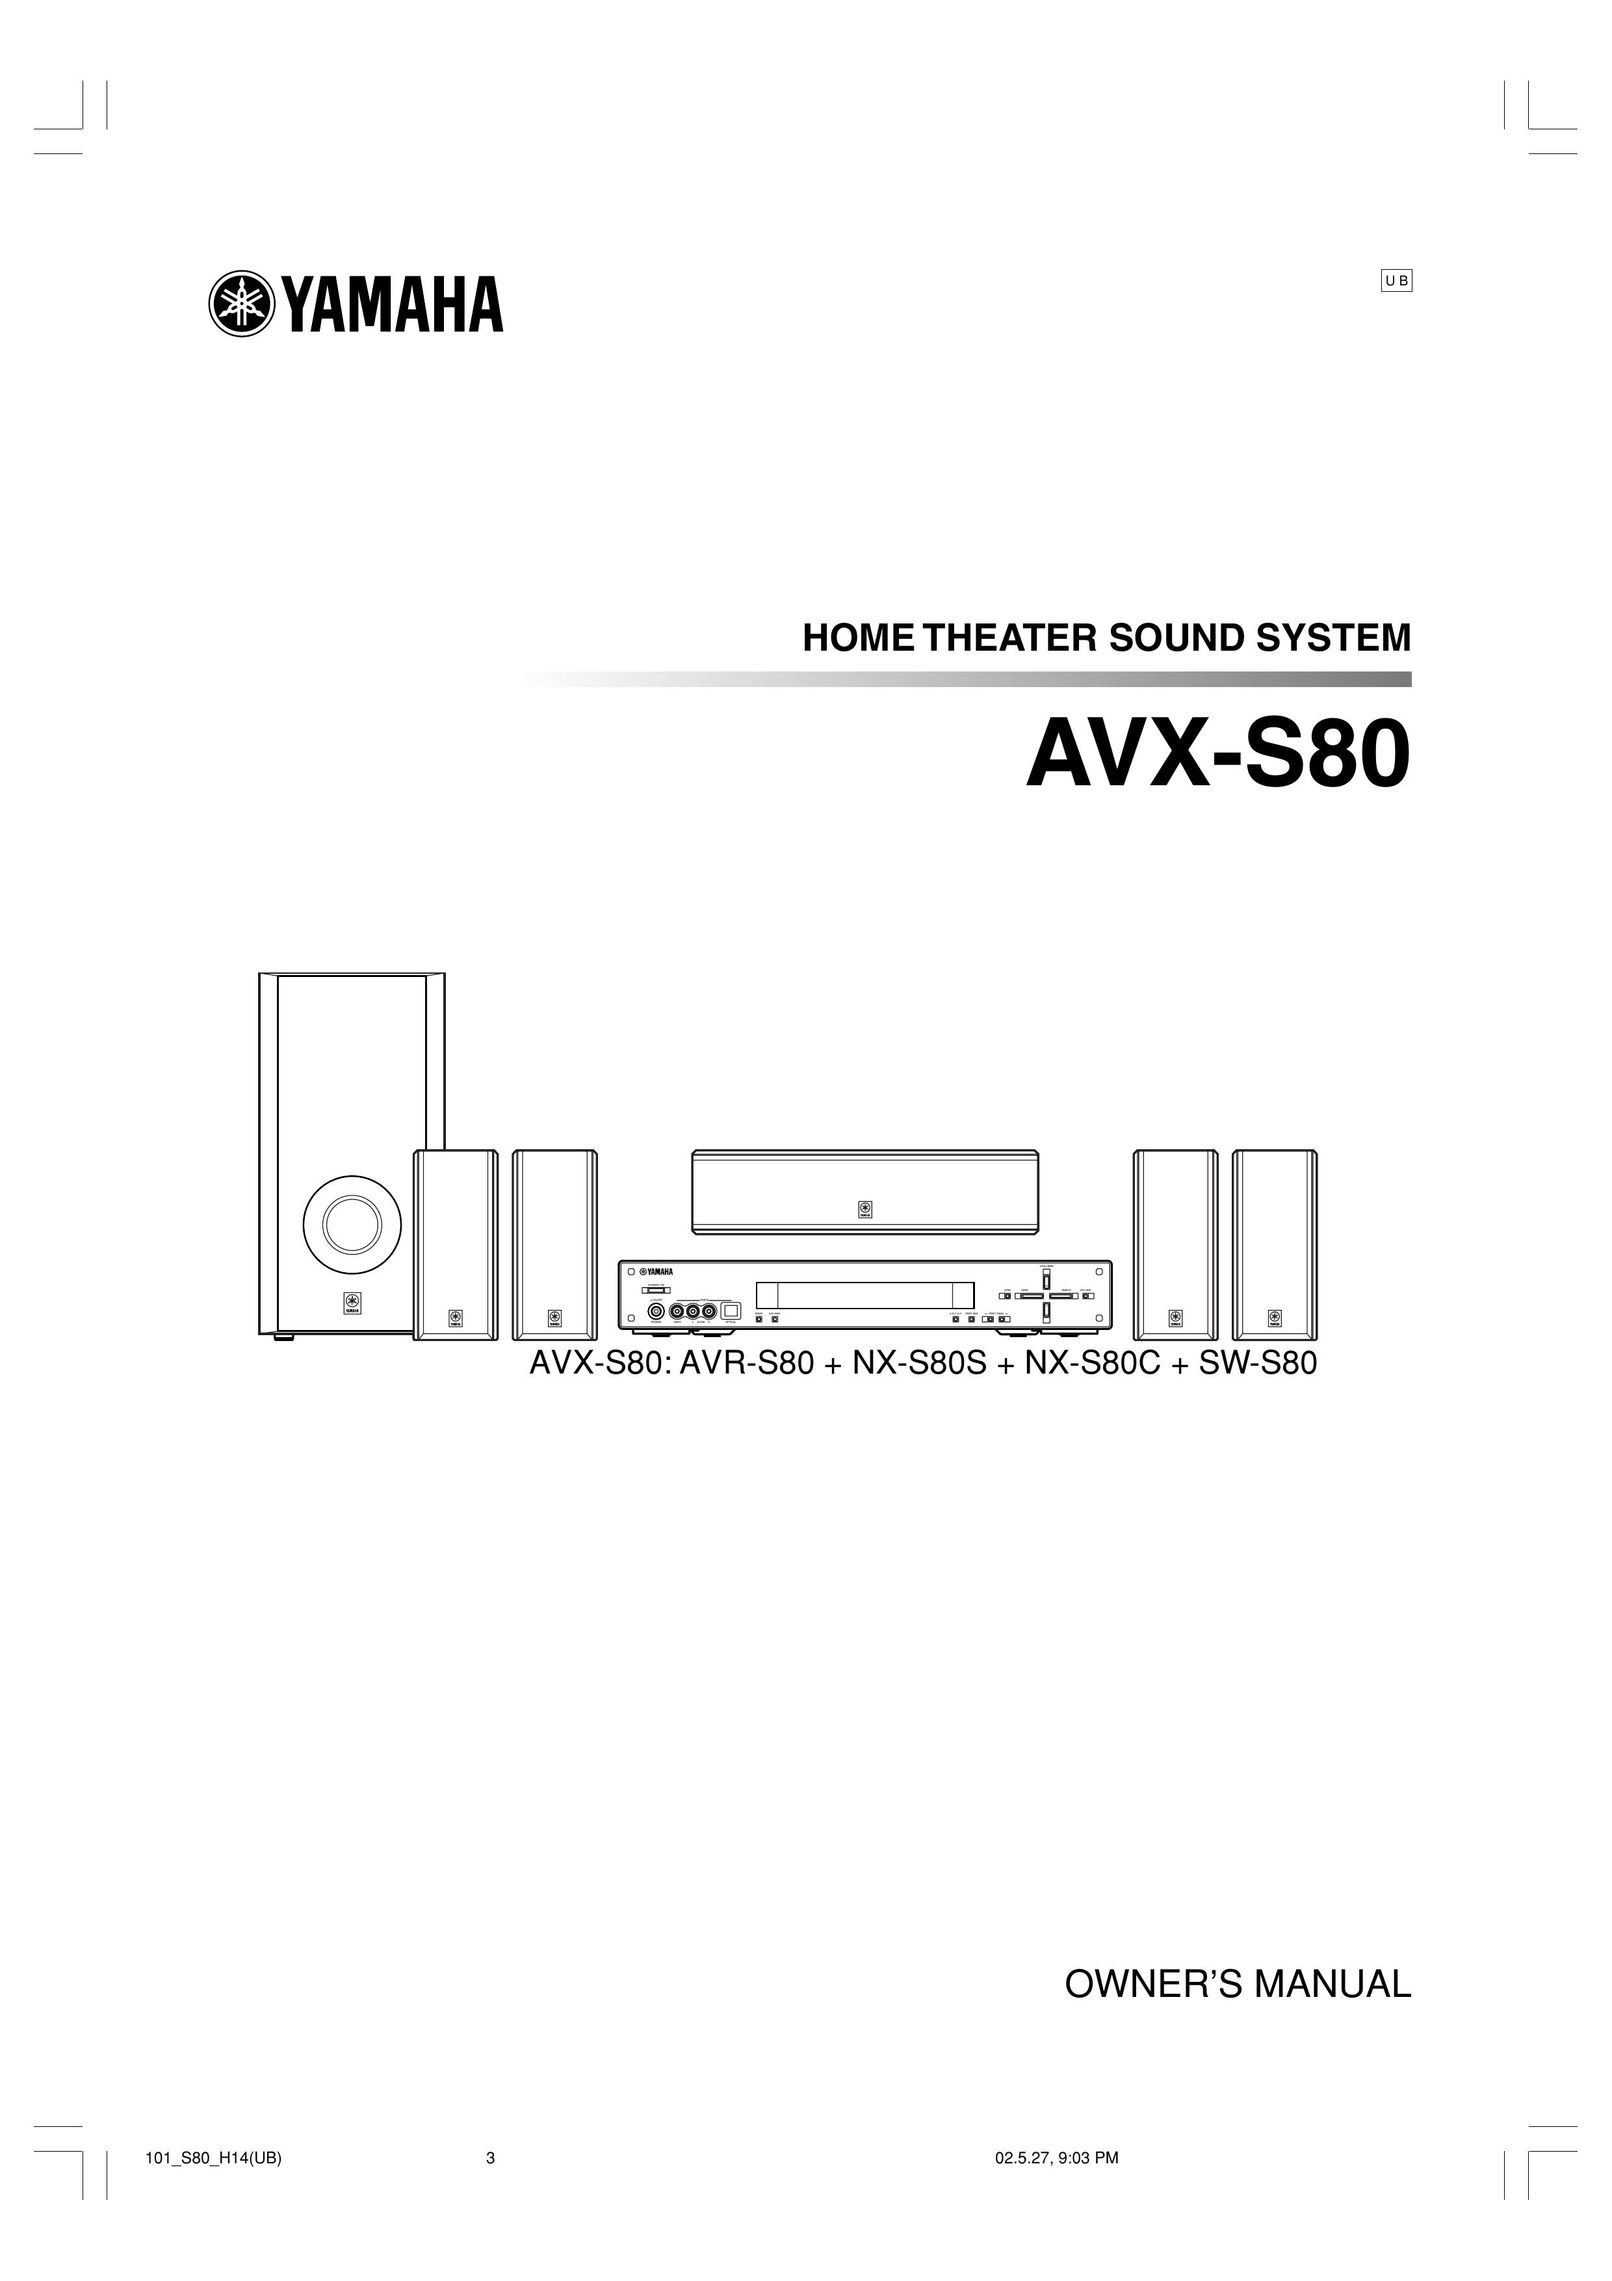 Yamaha HOMETHEATER SOUND SYSTEM Home Theater System User Manual